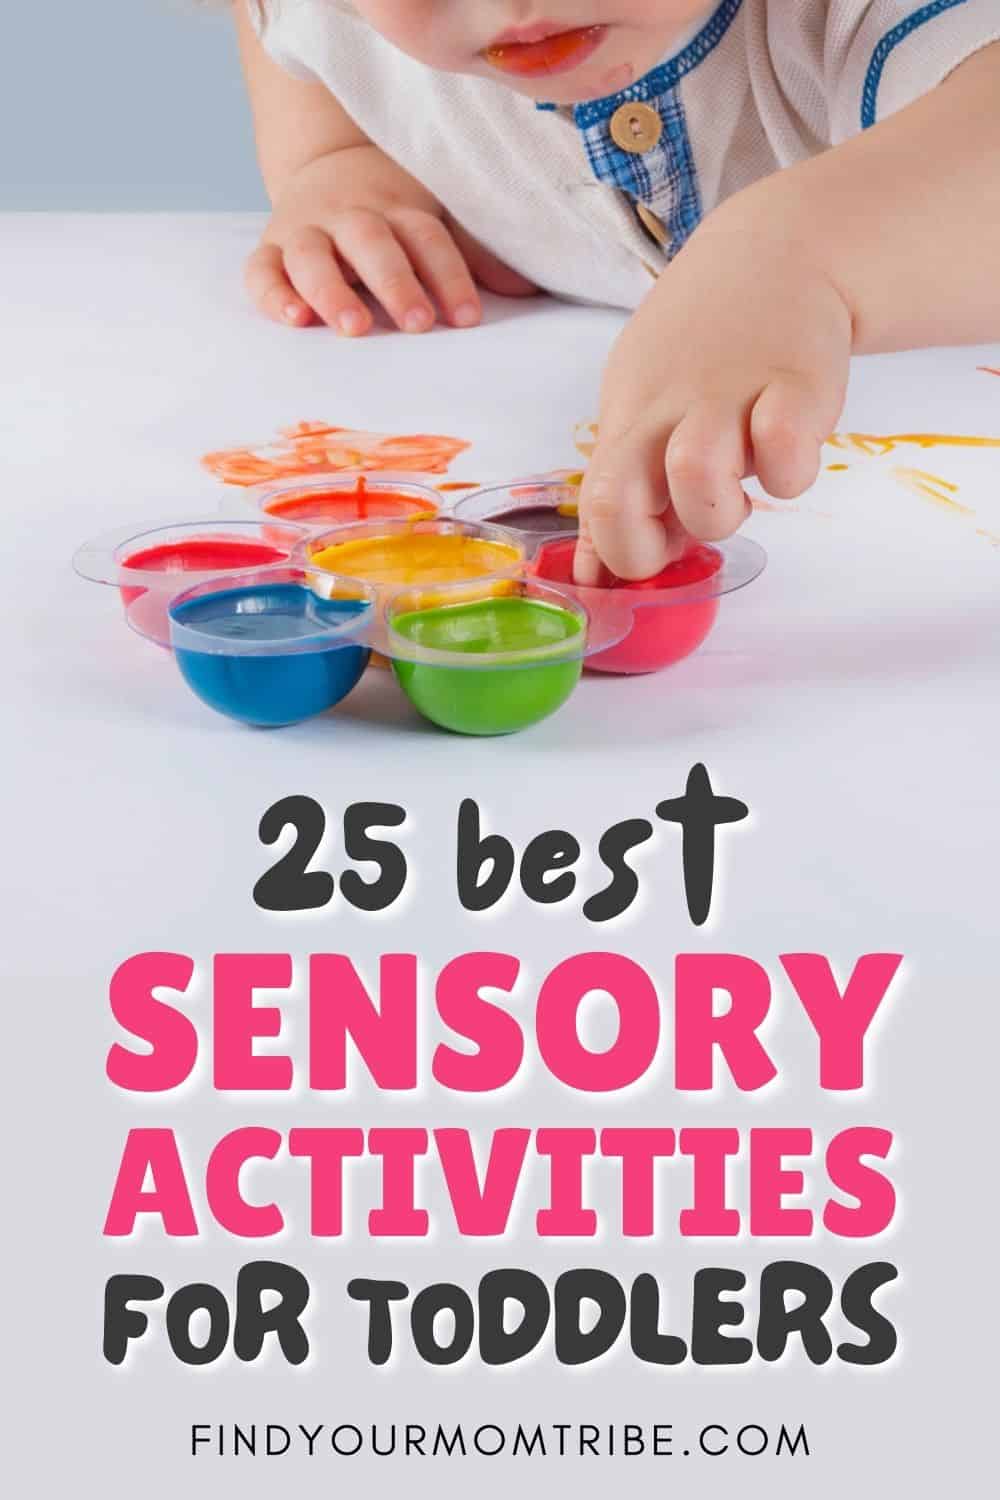 25 Best Sensory Activities For Toddlers Pinterest